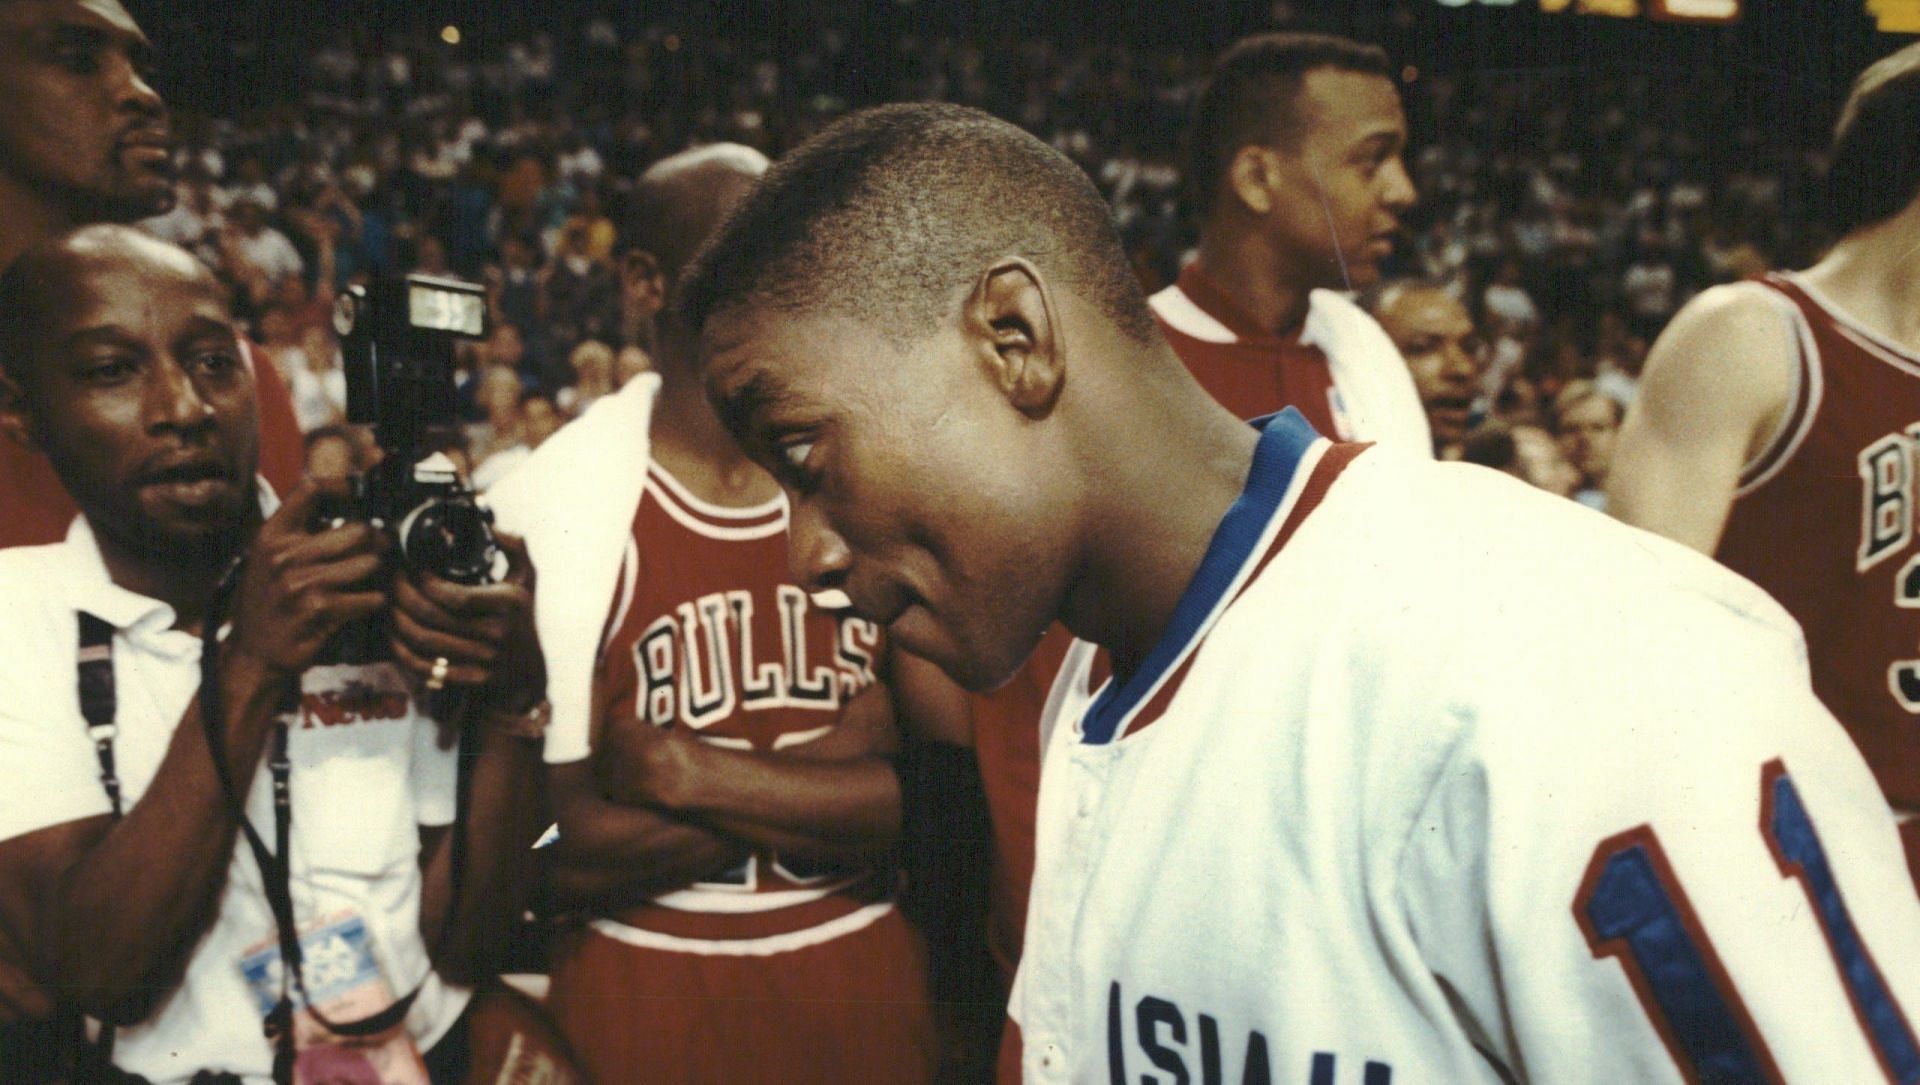 The lasting image of the 1991 Eastern Conference Finals was that of Isiah Thomas scurrying past Michael Jordan and the Chicago Bulls bench. [Photo: Detroit Free Press]